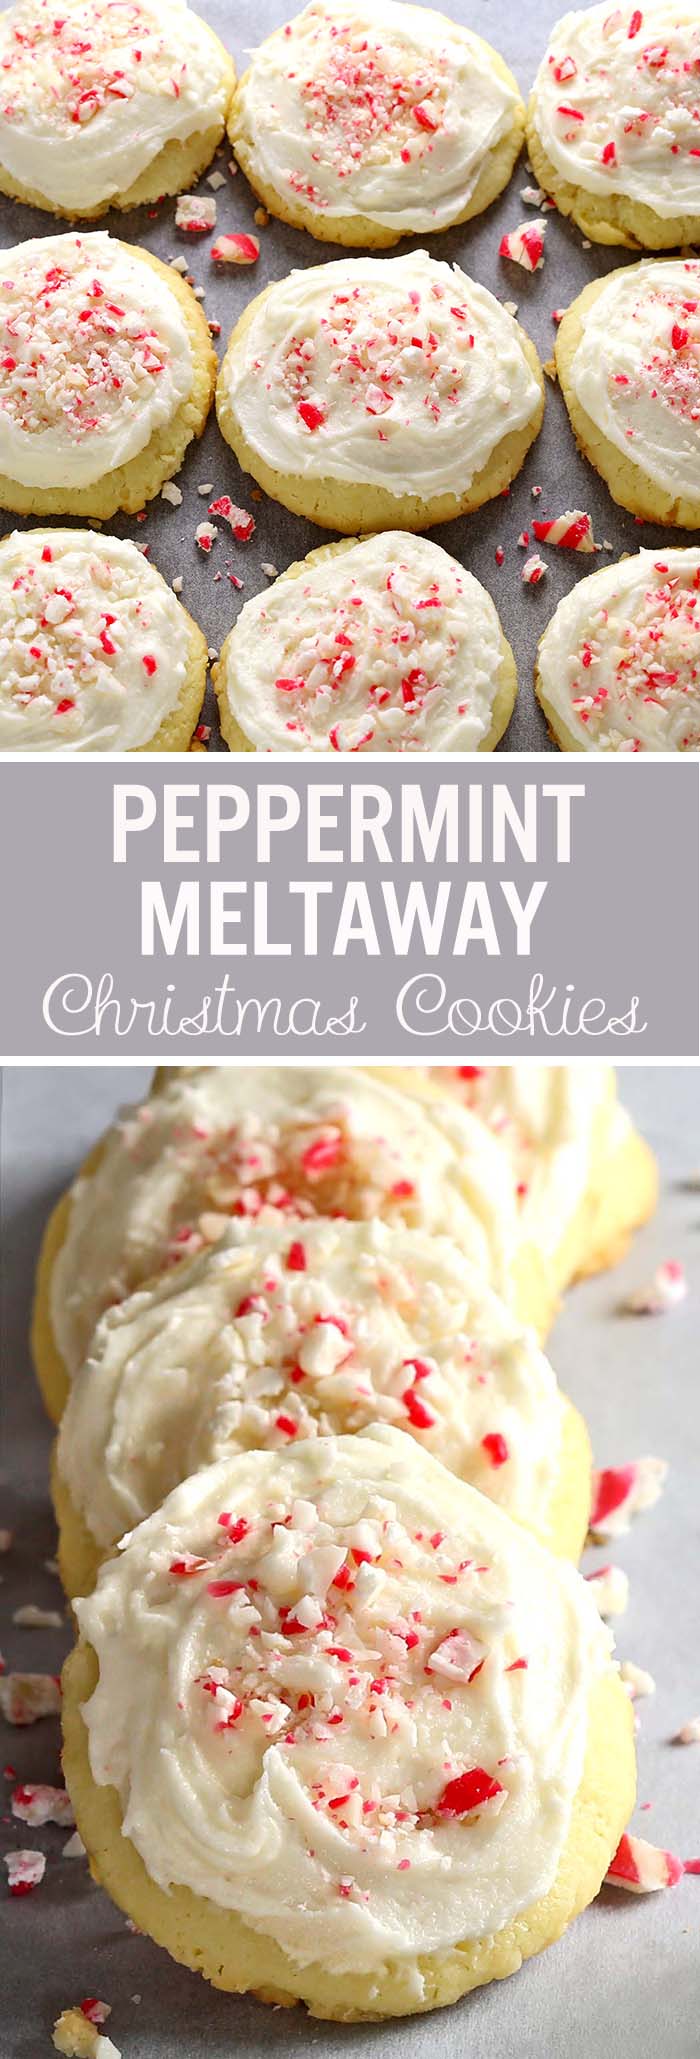 Meltaway Cookies now in a new, special Christmas Edition – in a little more festive suit, with a touch of Peppermint Buttercream Frosting and crispy little candy cane crumbs. And YES they DO melt in your mouth...do I need to say more ?